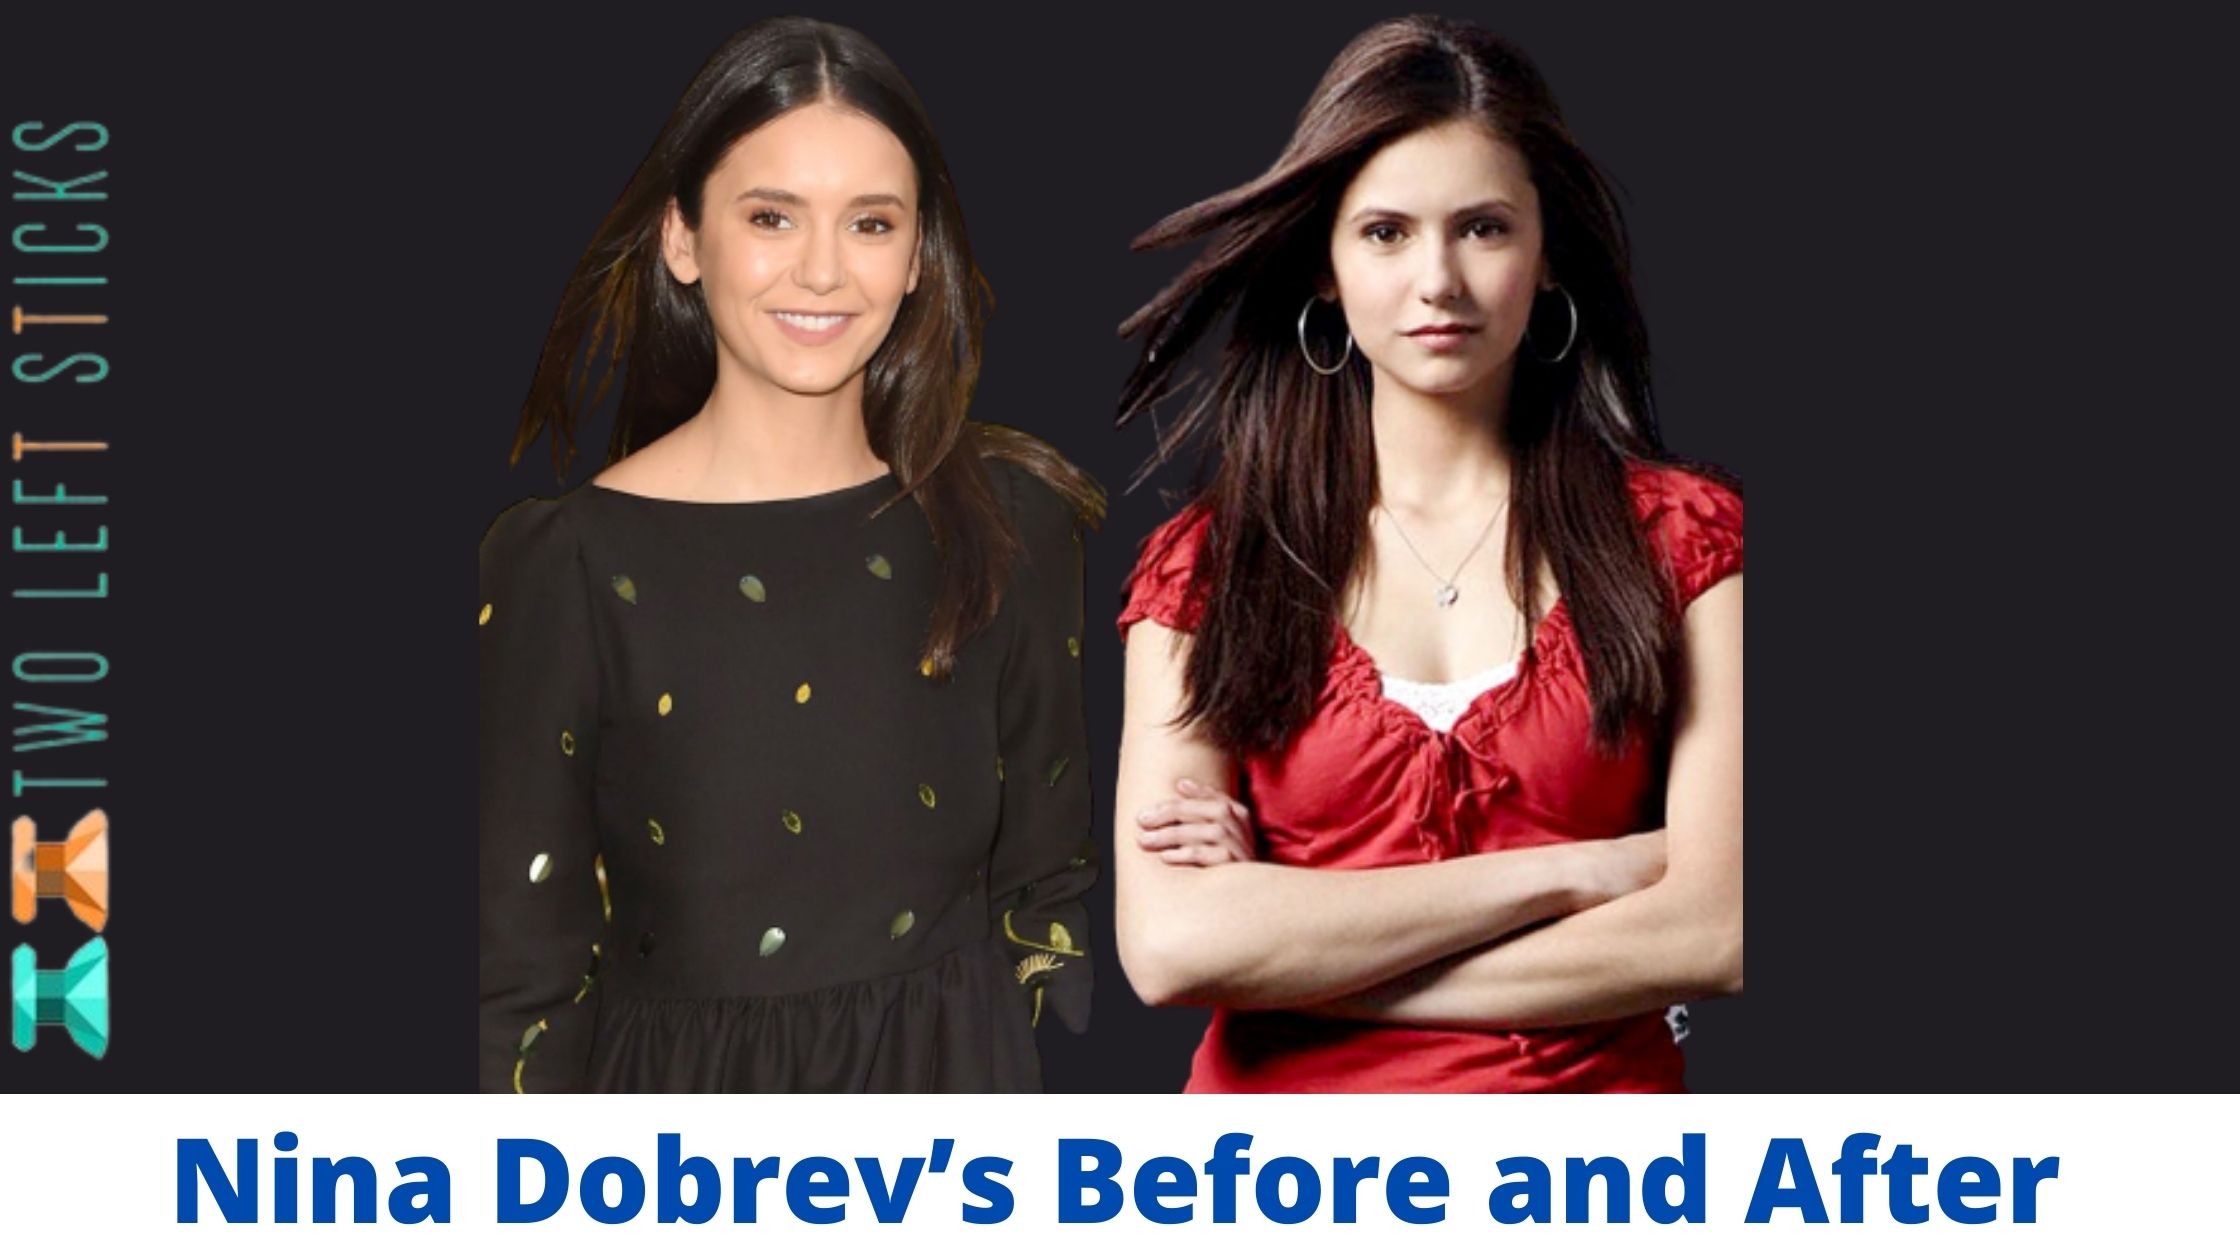 Nina Dobrev Before and After- The Evolution of ‘Vampire Diaries’ Actress